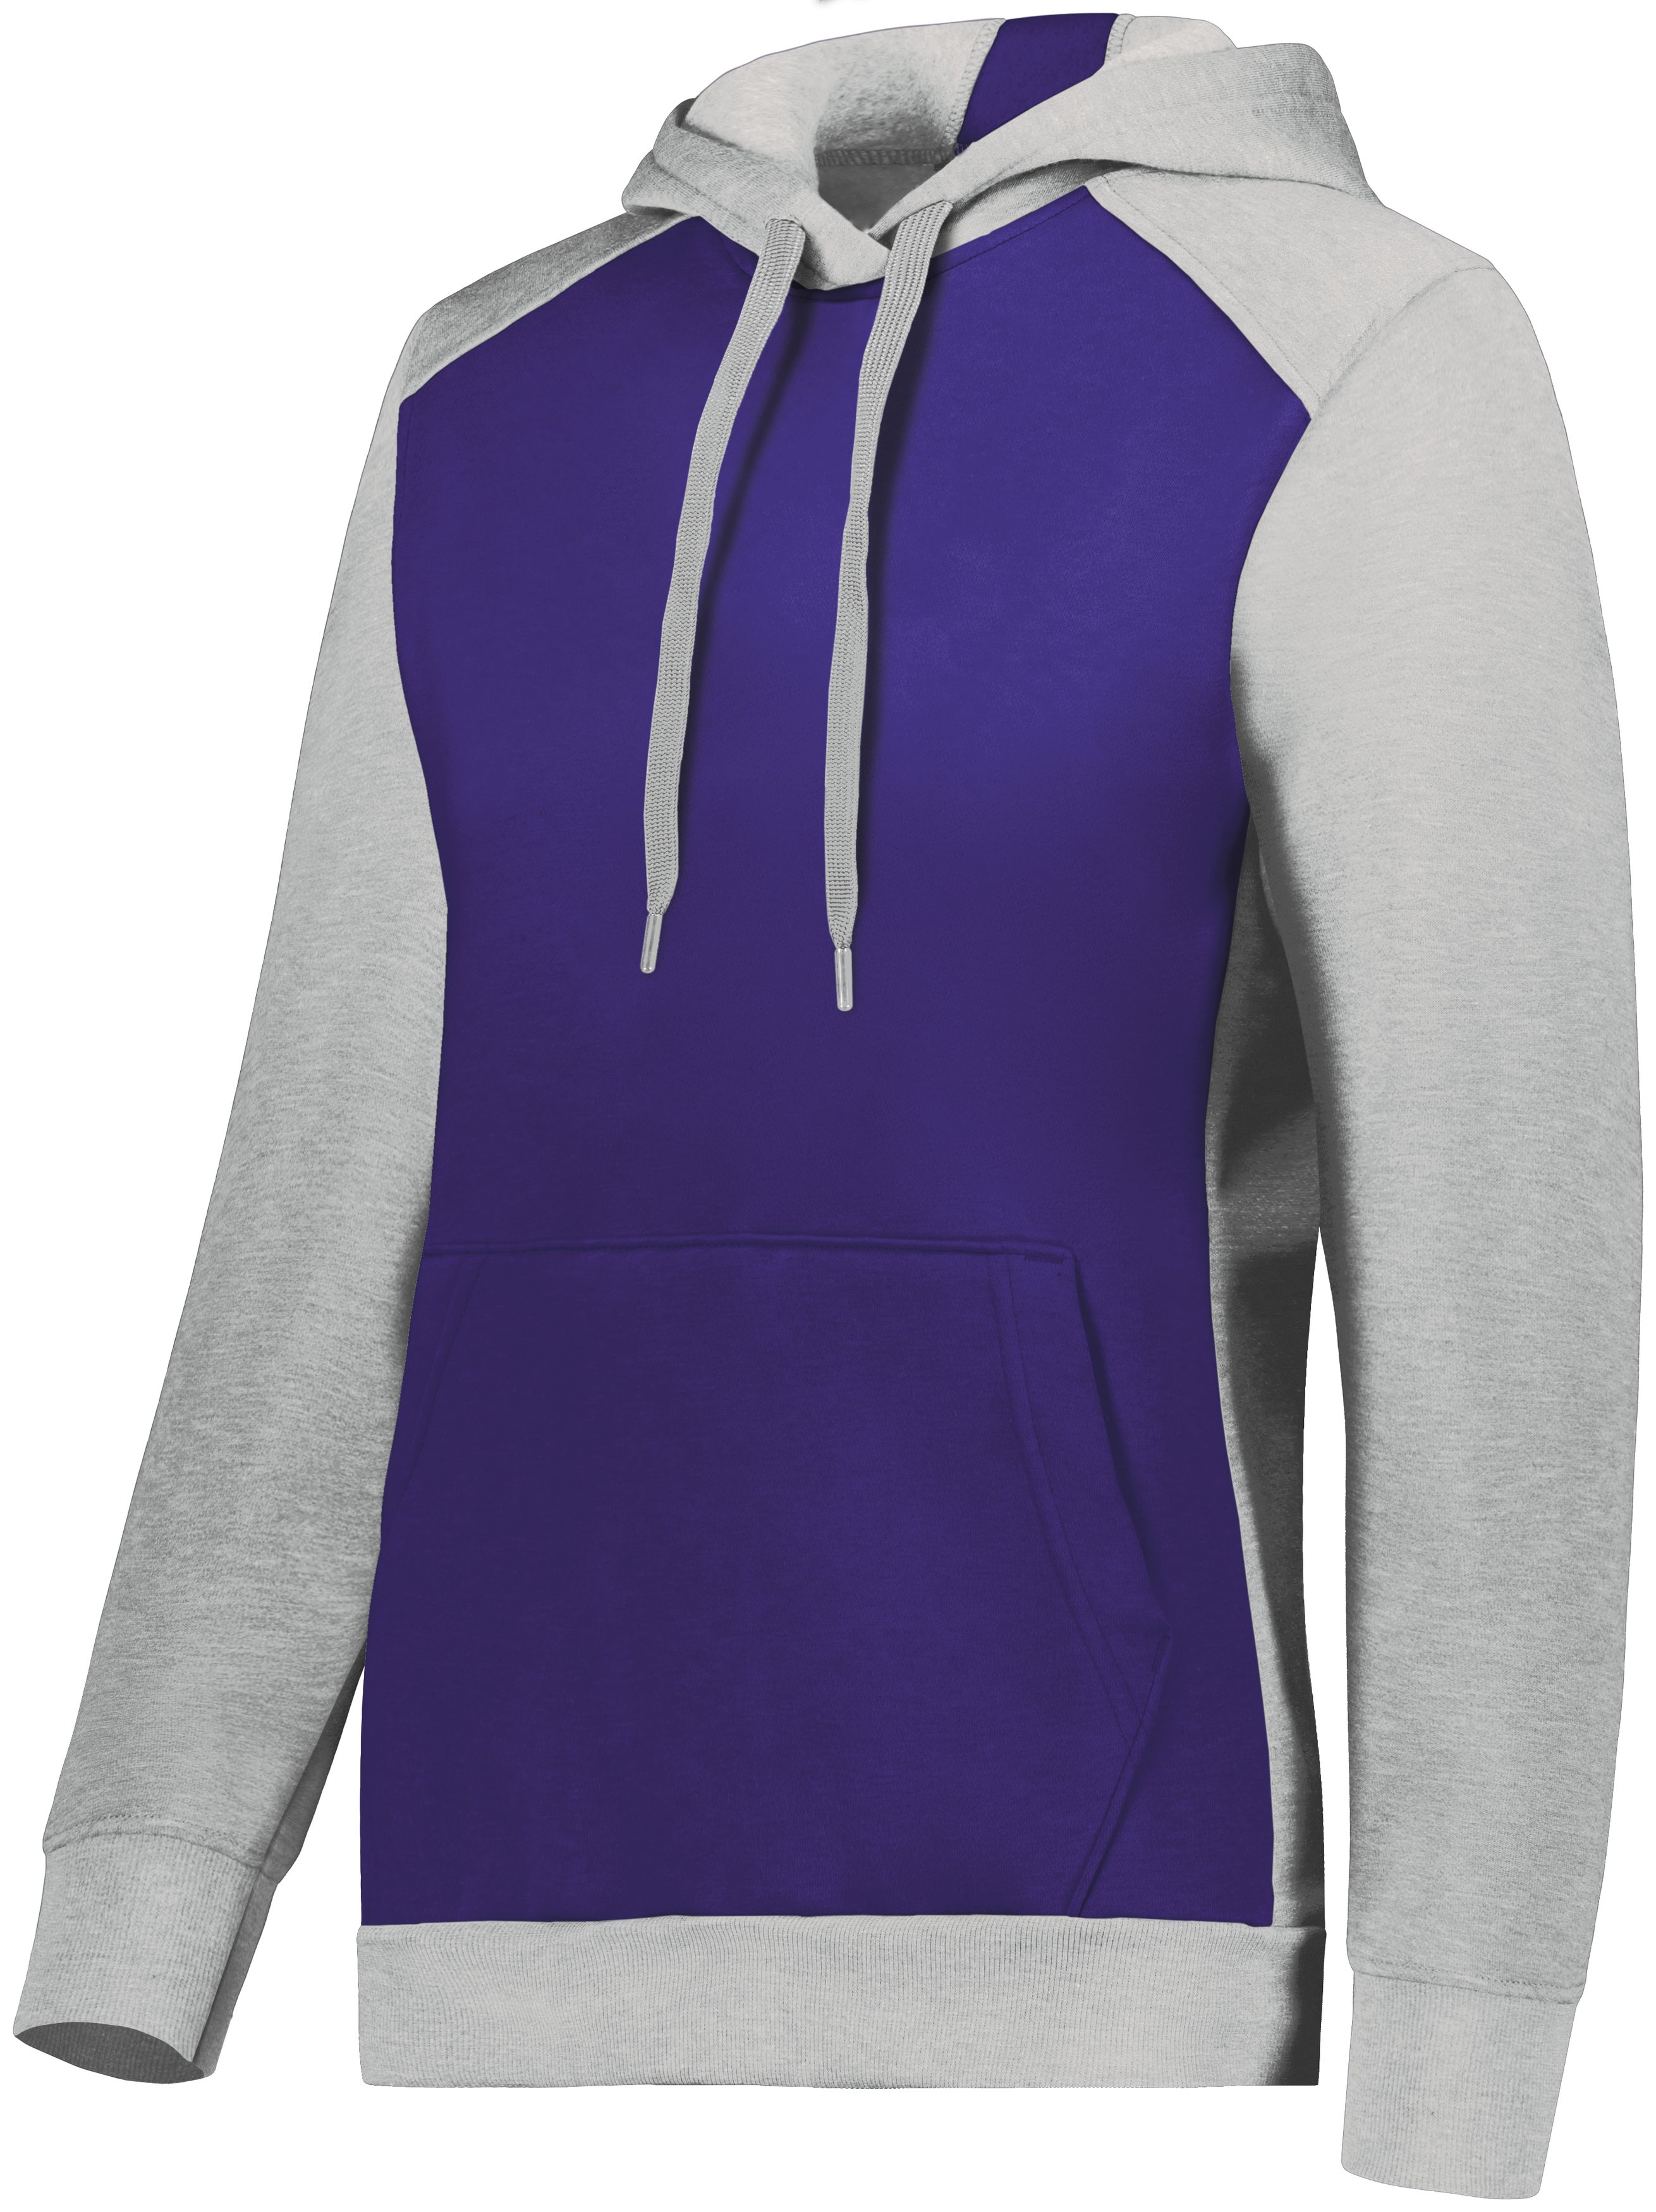 click to view Purple/Grey Heather